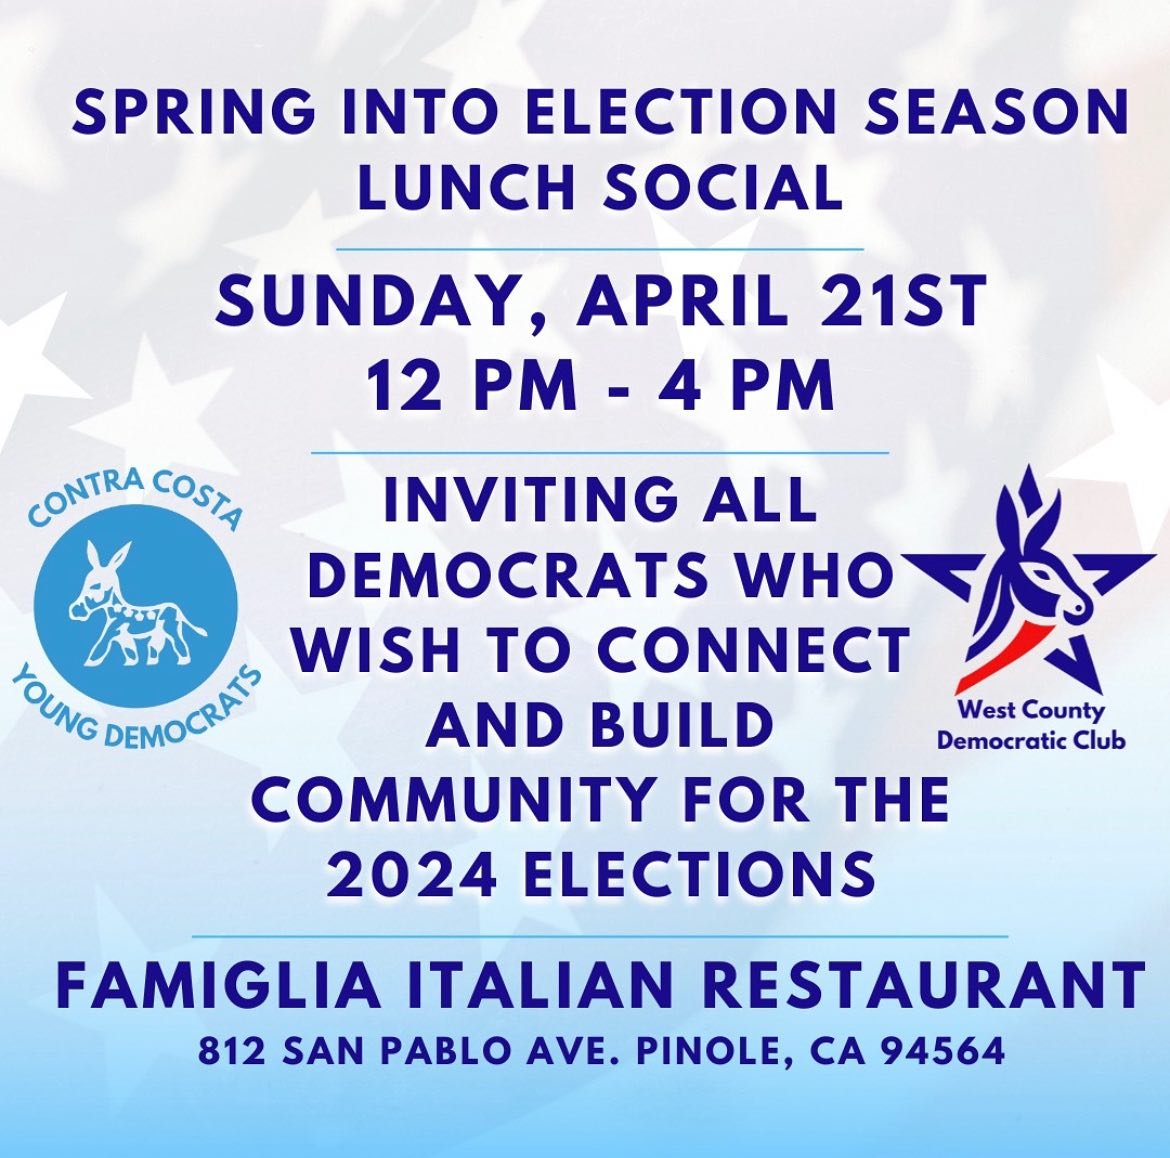 Hey everyone! Super excited to let you know about our upcoming social event in collaboration with West County Democratic Club! All are welcome to attend :) 
@westcountydemocraticclub